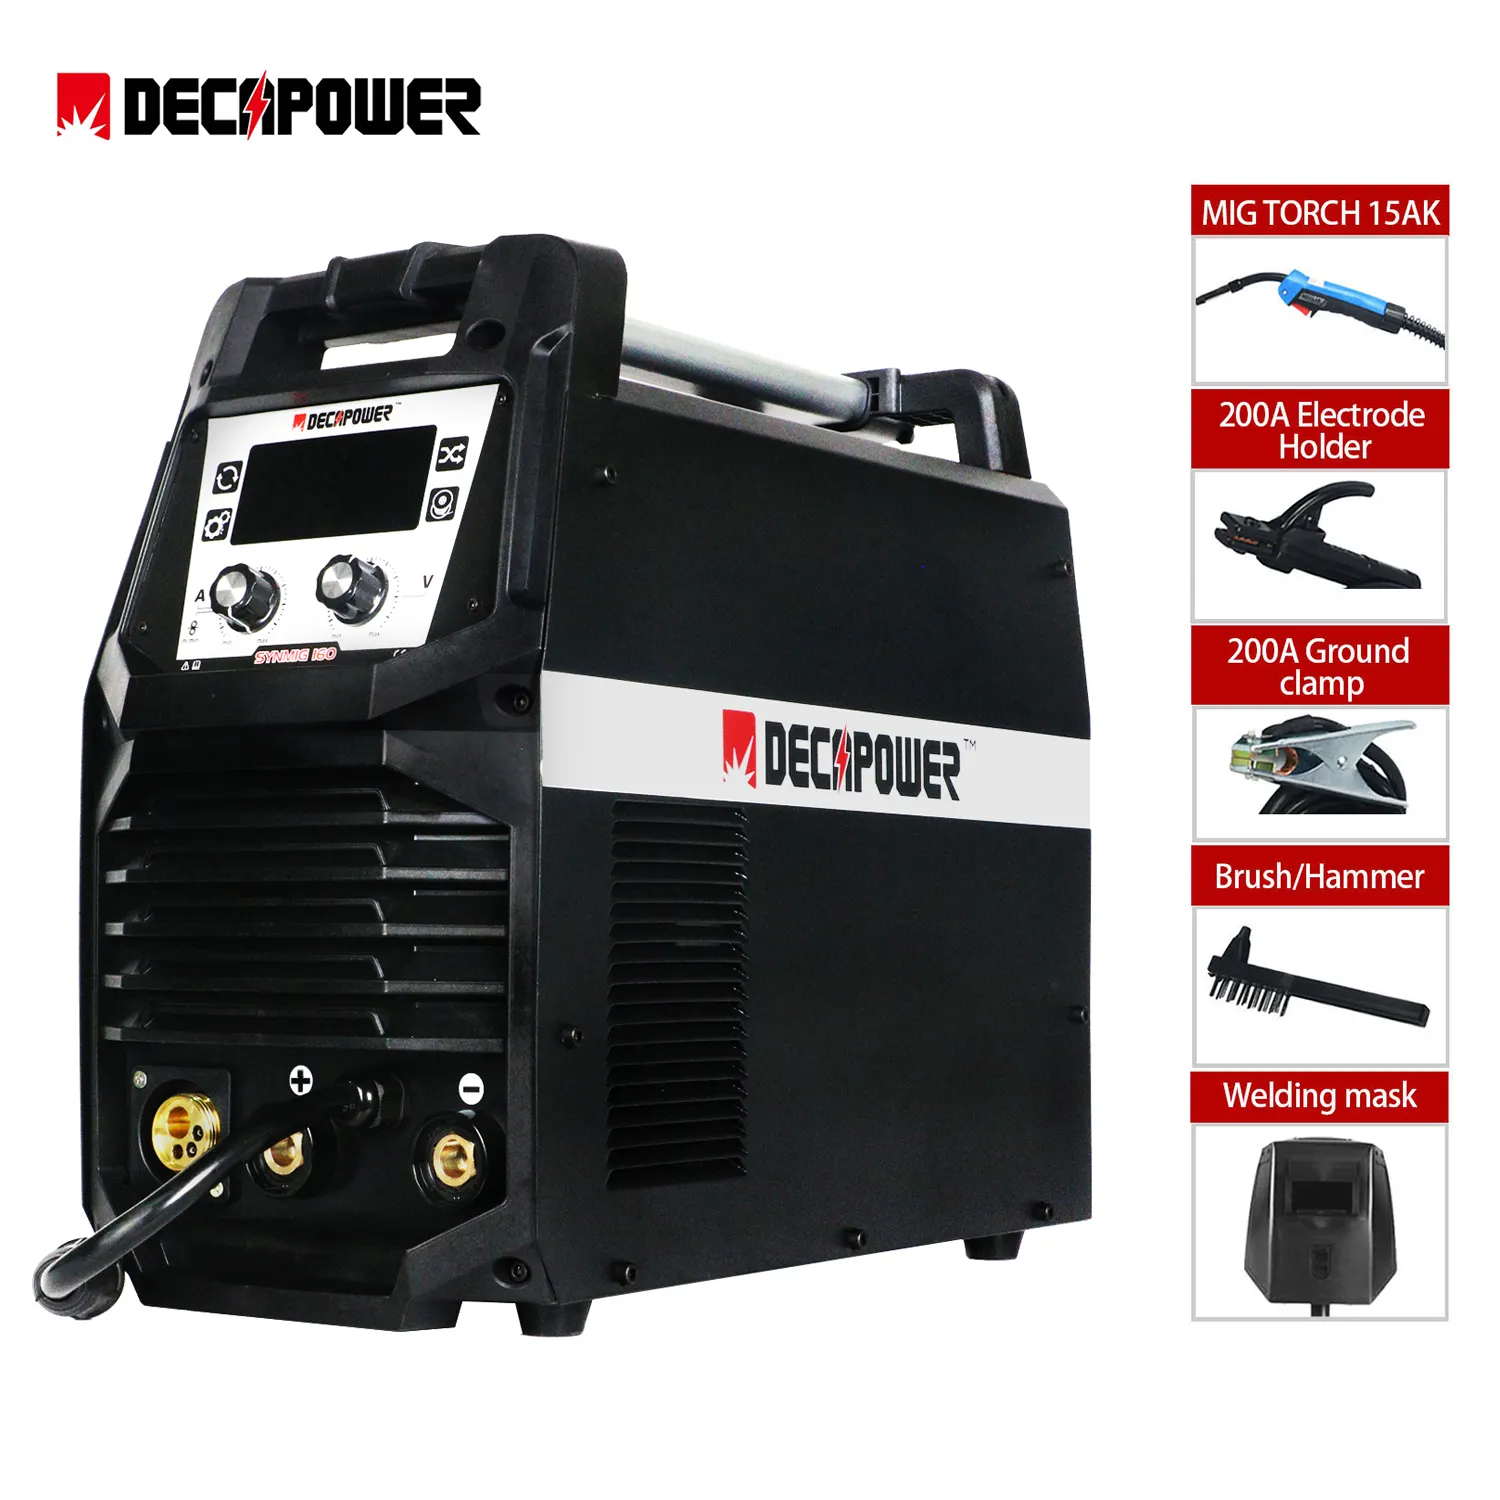 DECAPOWER 200A 4 in 1 ARC MMA TIG MAG MIG Welder for Gas Gasless Welding Machine with Indutance Adjustment